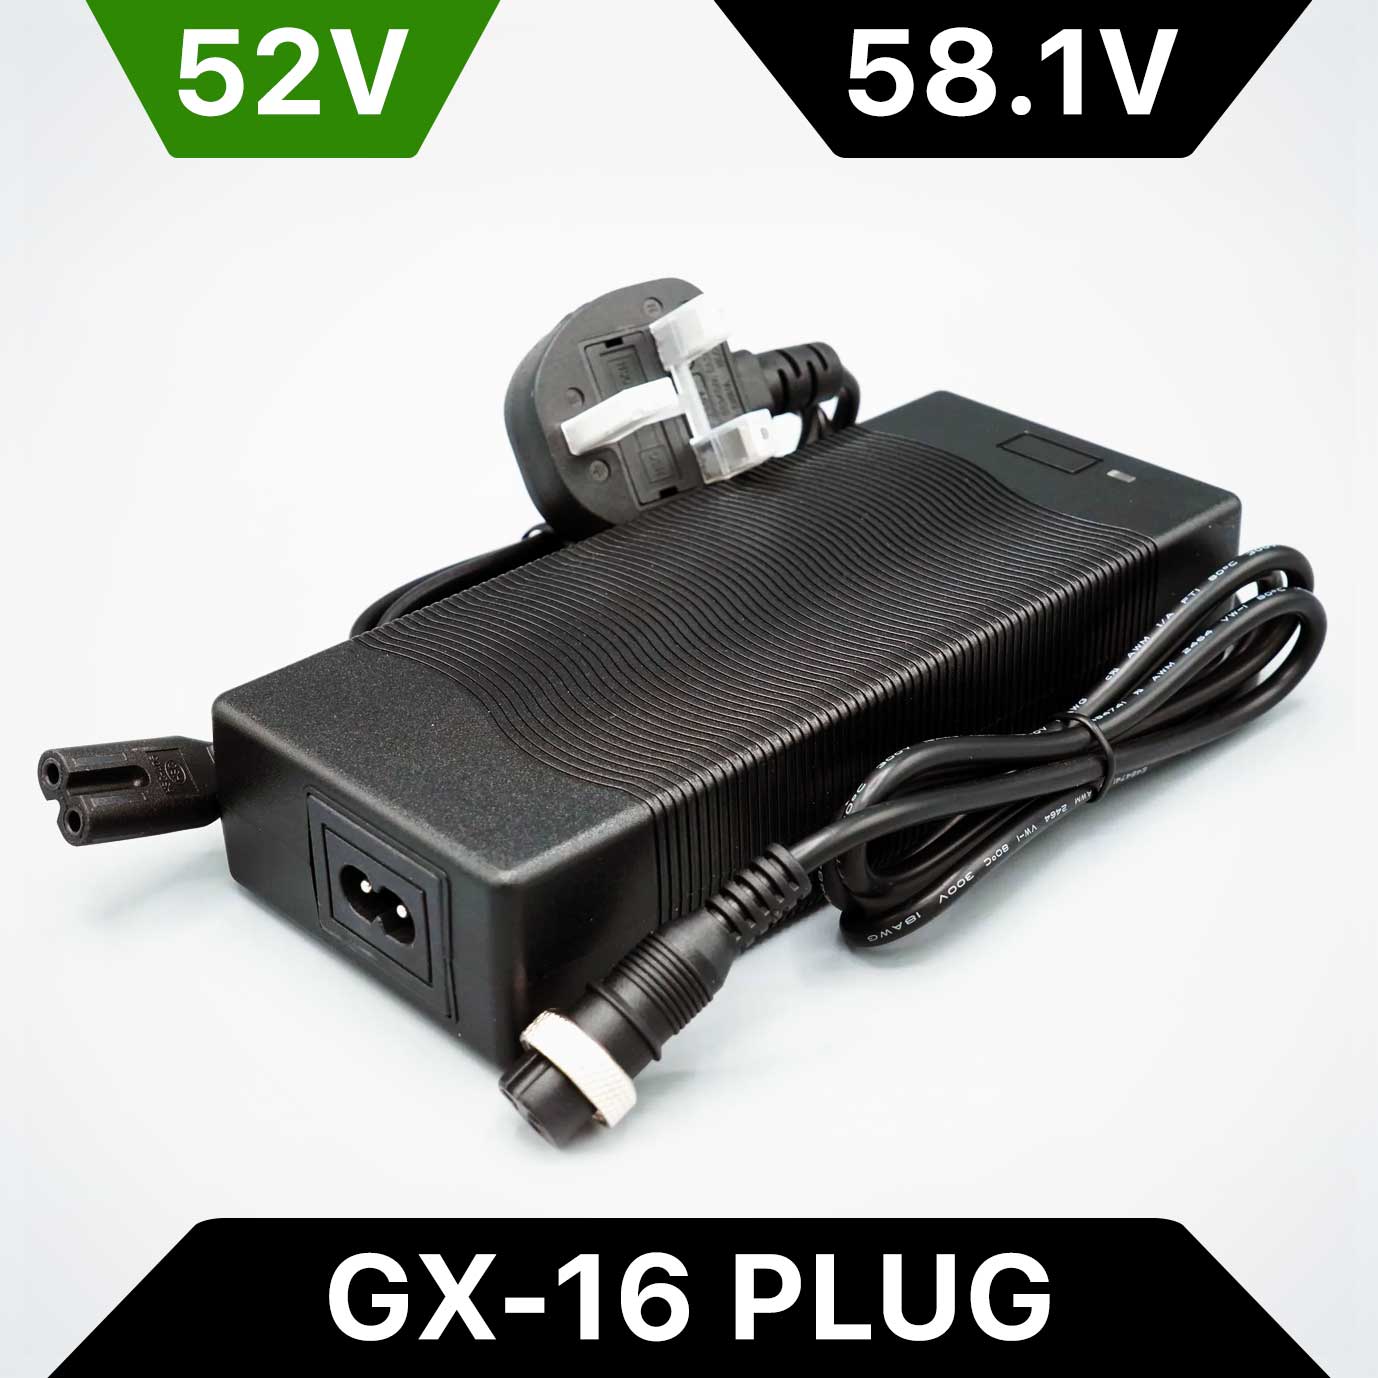 52V 2A Slow Charger for Dualtron, 58.1V Max, GX16 Plug